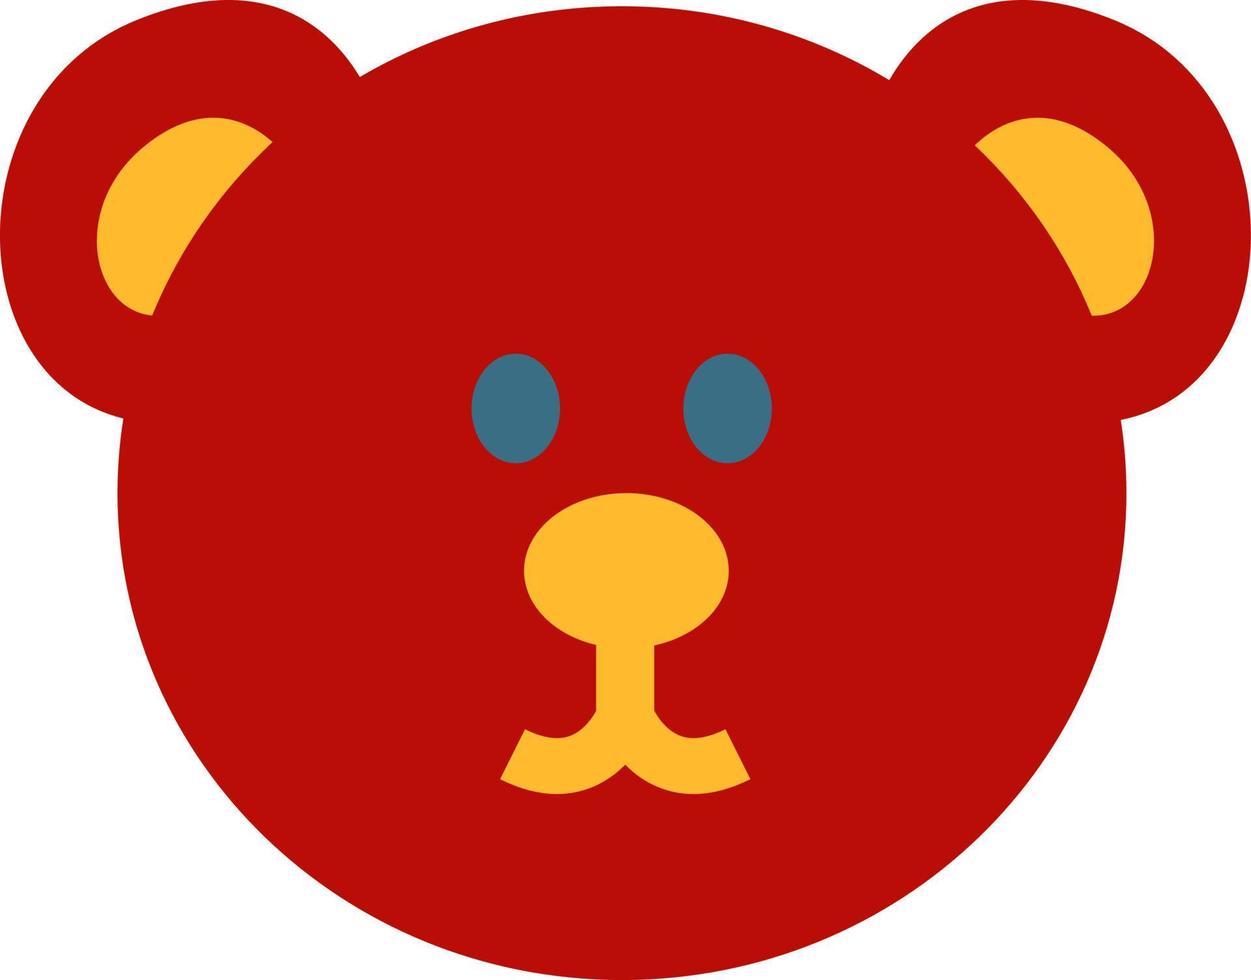 Red bear toy, illustration, vector on a white background.